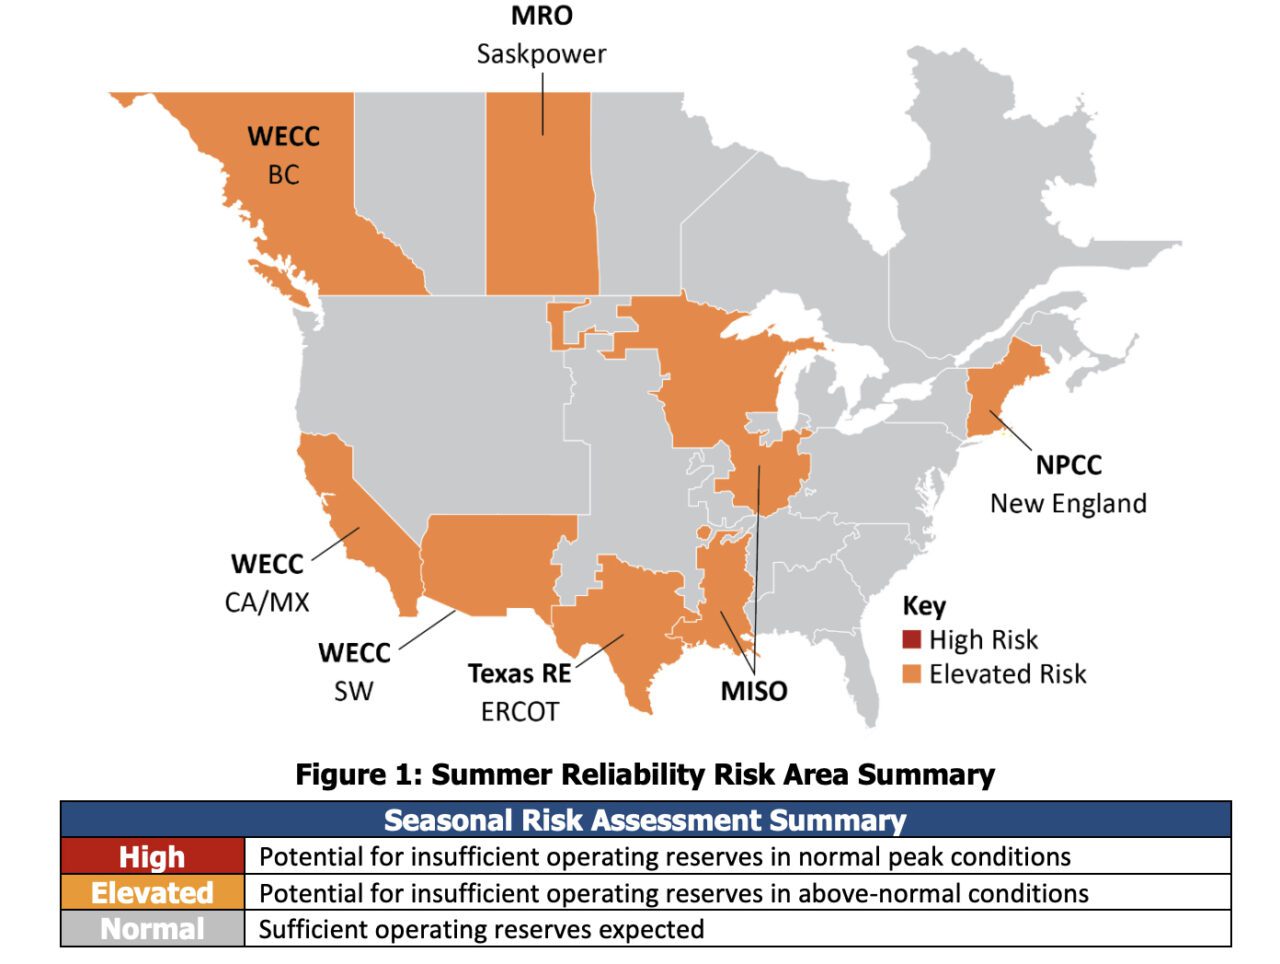 NERC: Summer Grid Outlook Improved But Still Vulnerable to Extreme Weather, Demand Growth Spikes